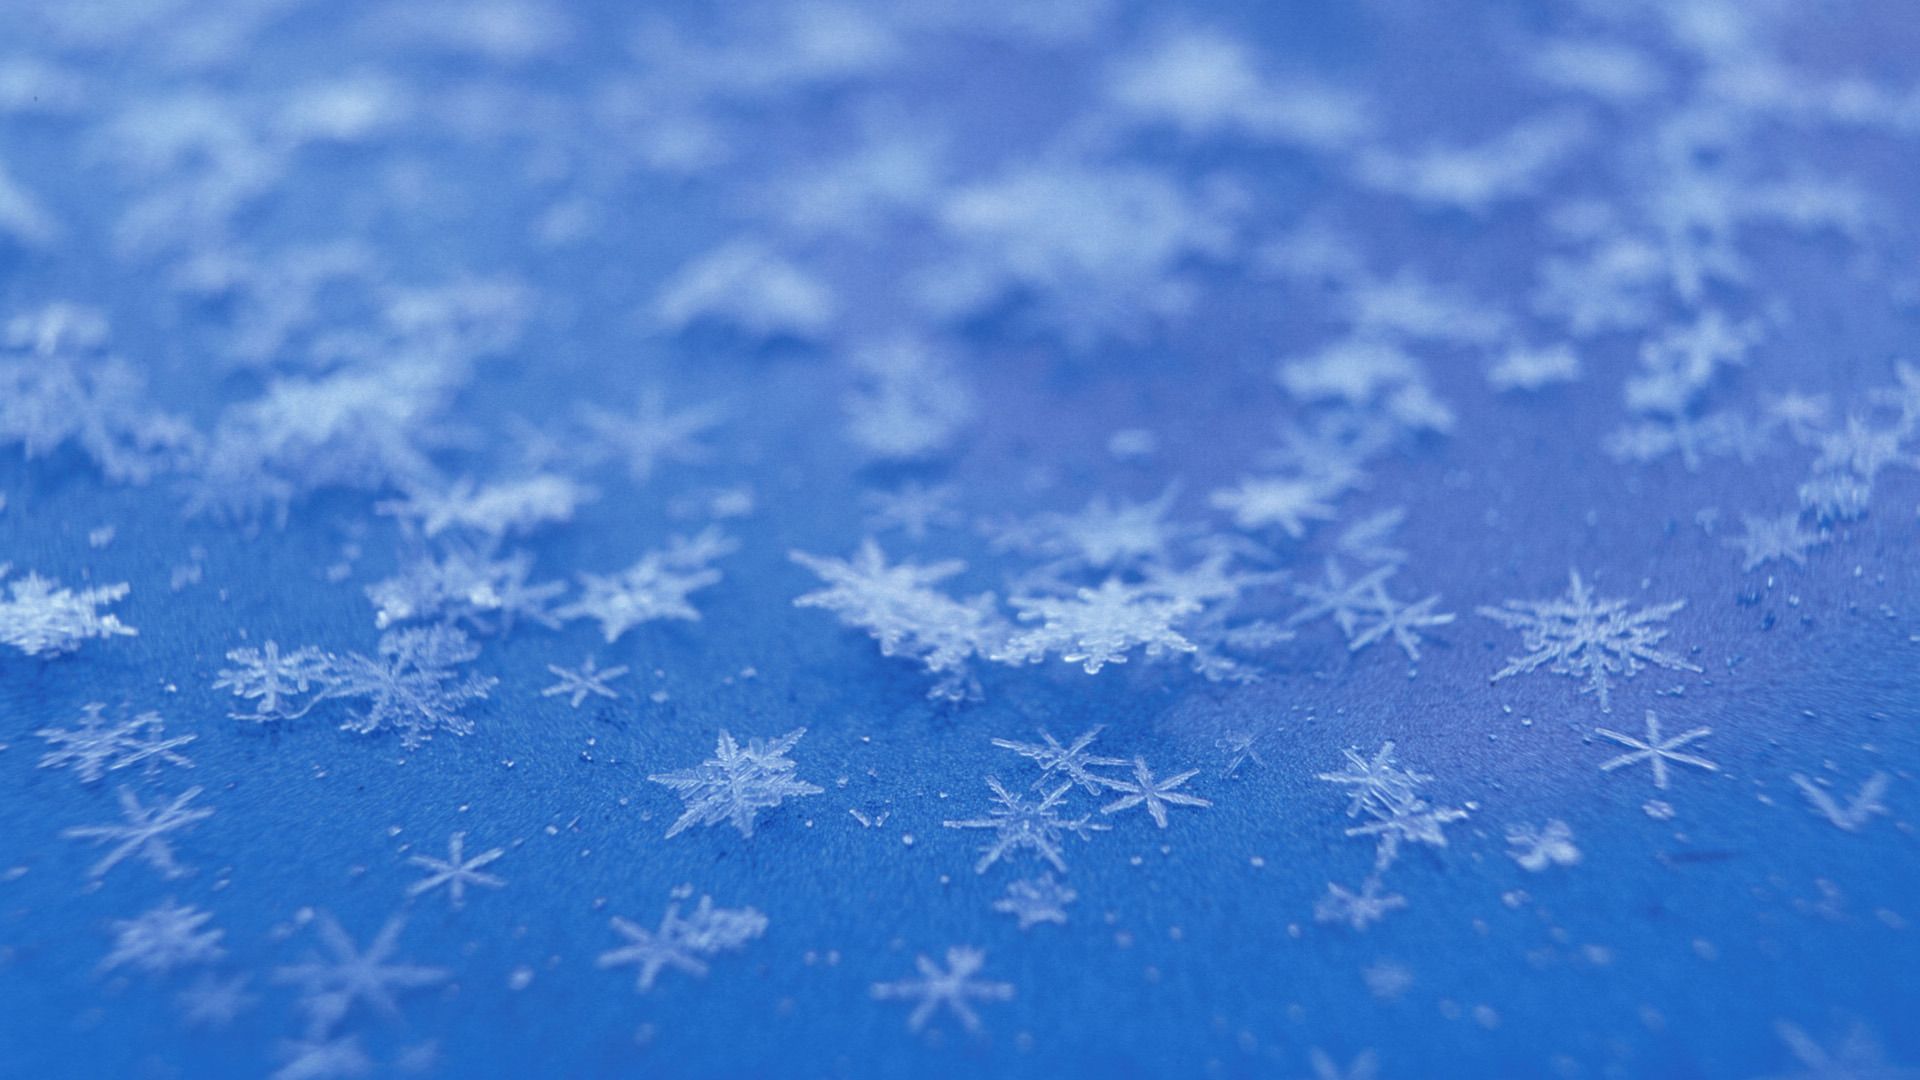 A close up of snowflakes on blue background - Snowflake